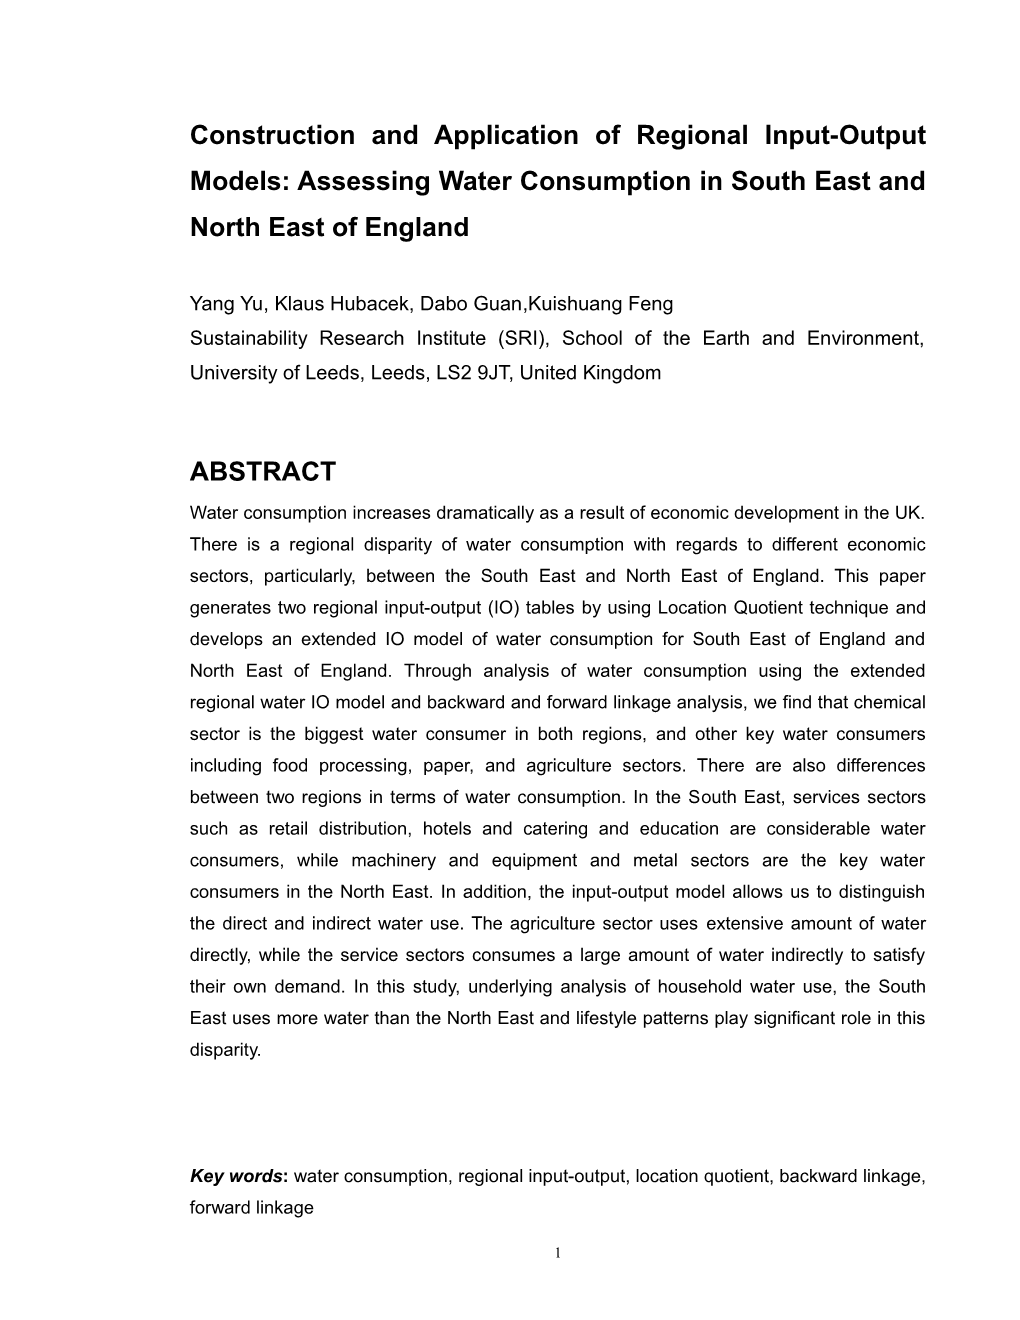 Construction and Application of Regional Input-Output Models: Assessing Water Consumption